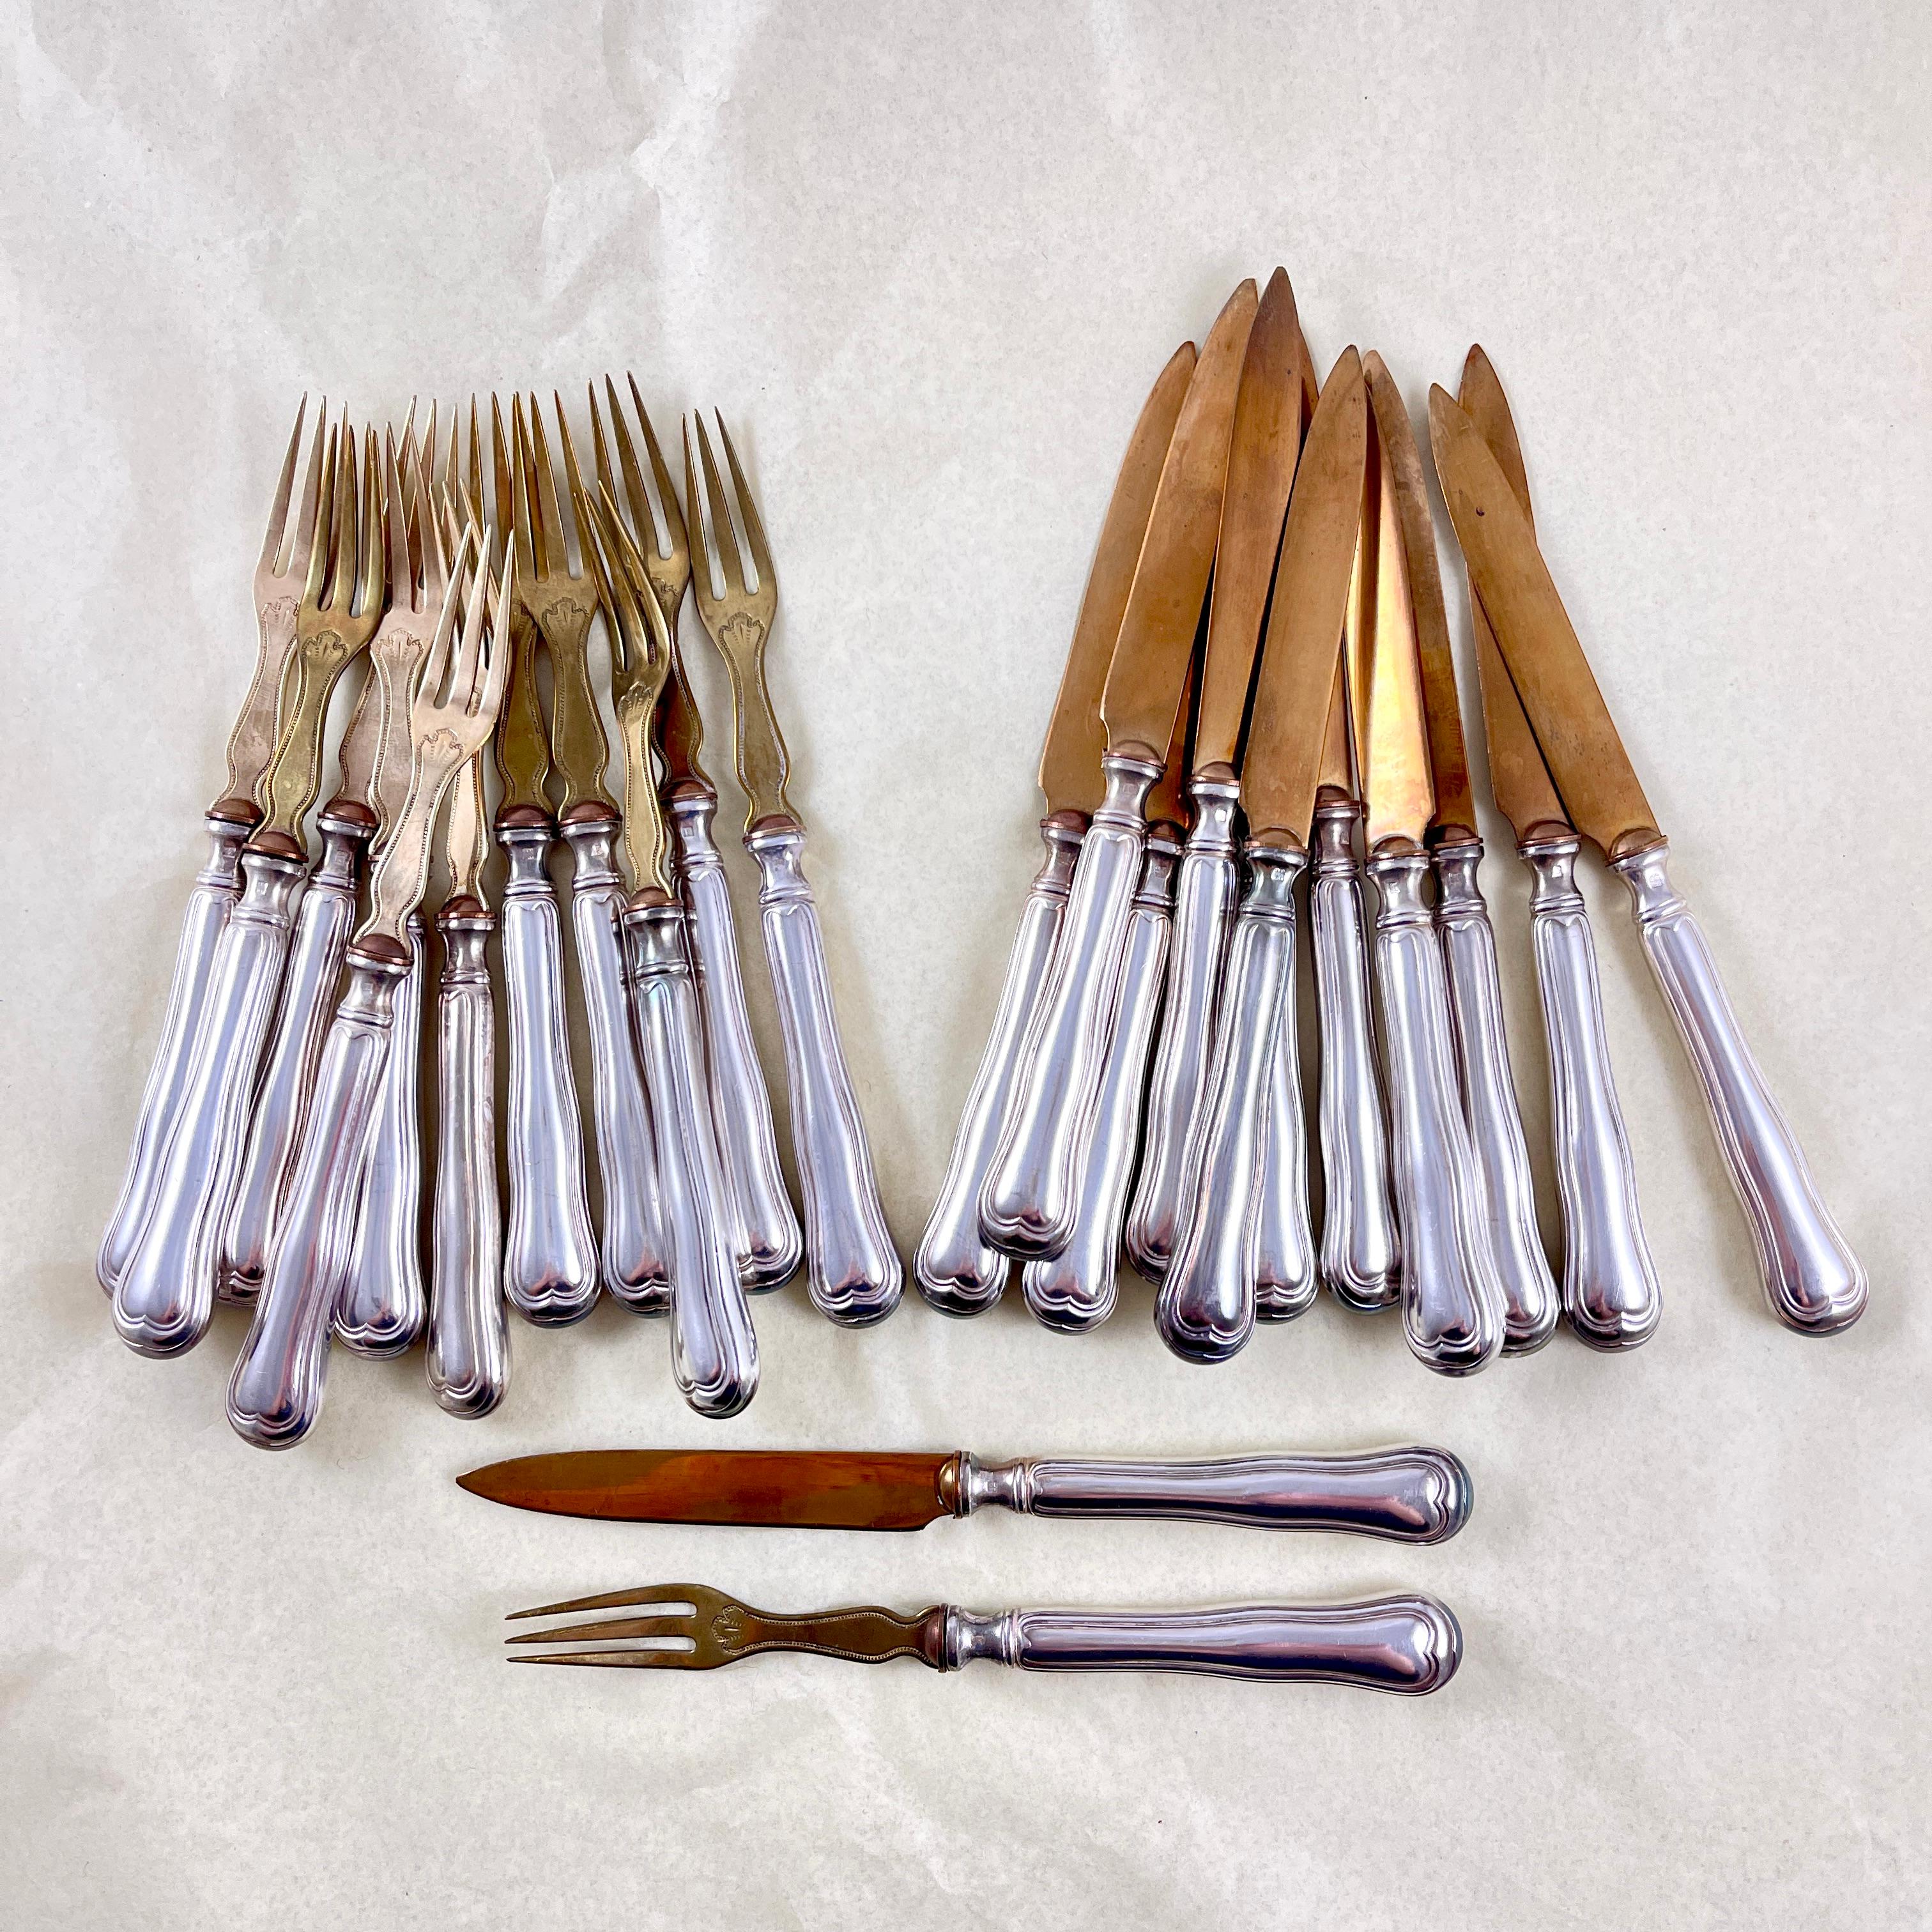 
A set of twenty-four Art Nouveau period forks and knives made by Dominique Capmartin, circa 1900 – 1910.

Sized for the cheese and fruit or dessert courses for the French table, the silver plate and brass service consists of twelve each forks and